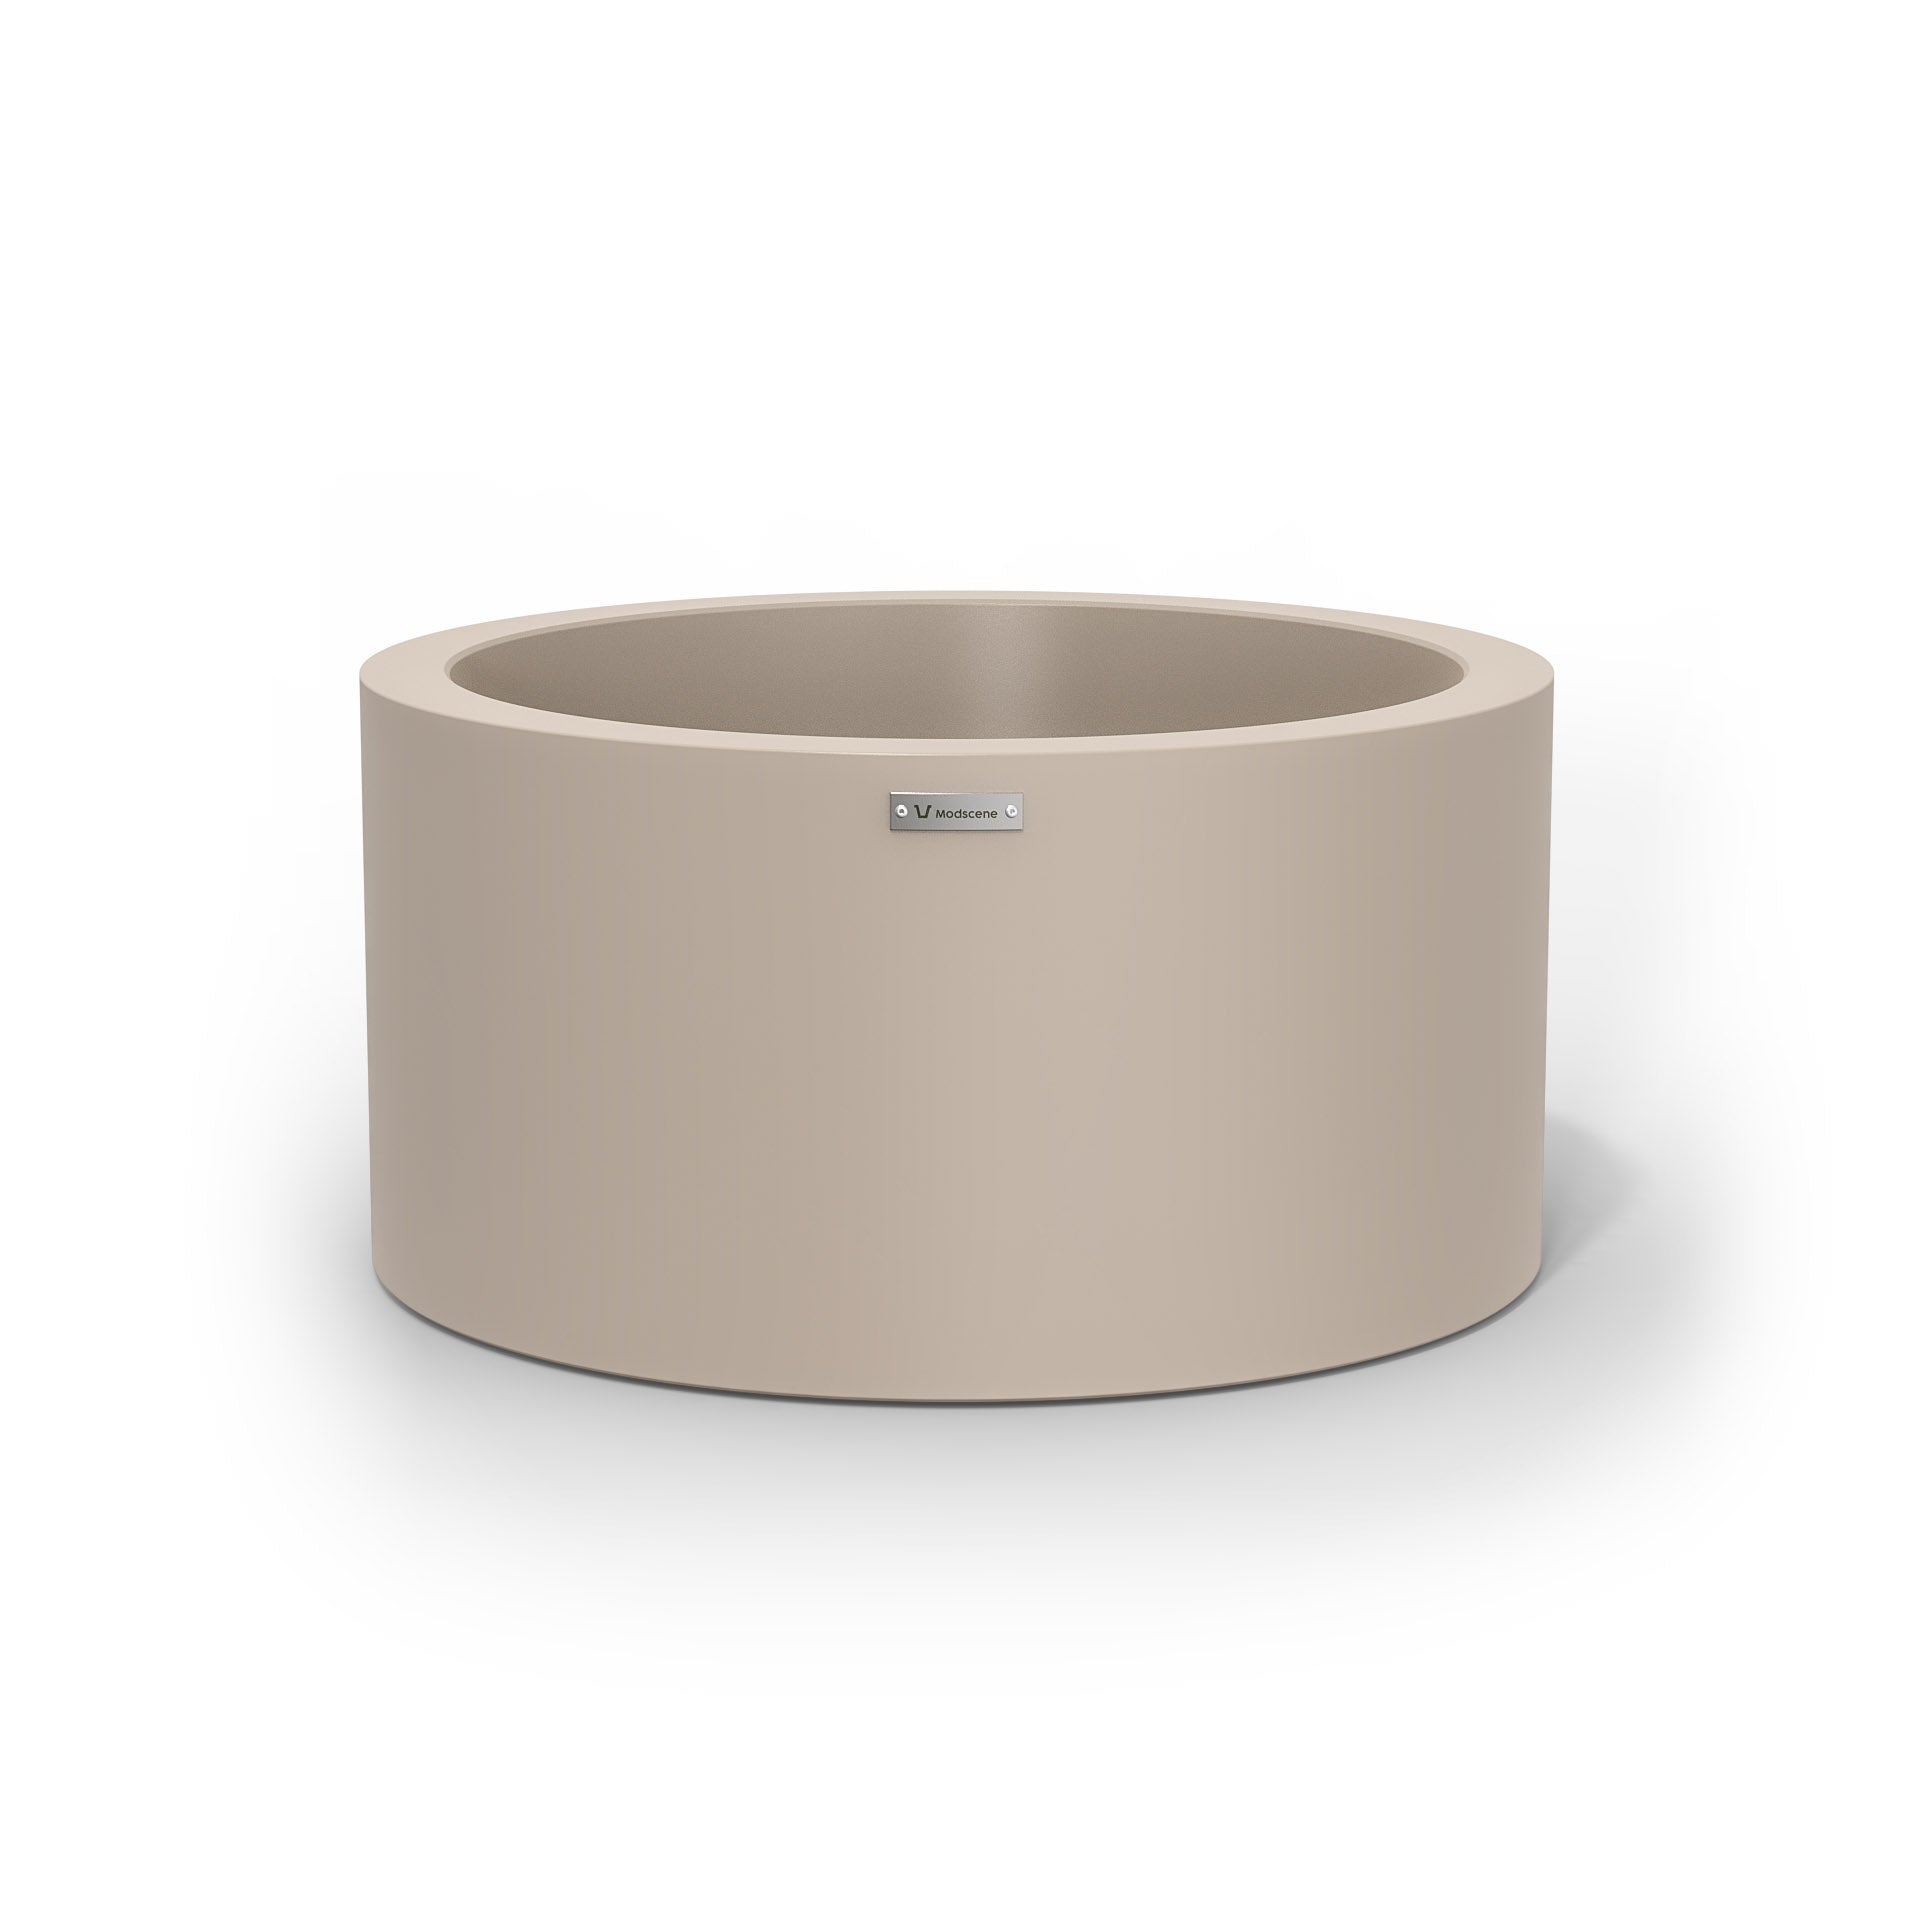 A medium sized planter pot in a sandstone colour made by Modscene.